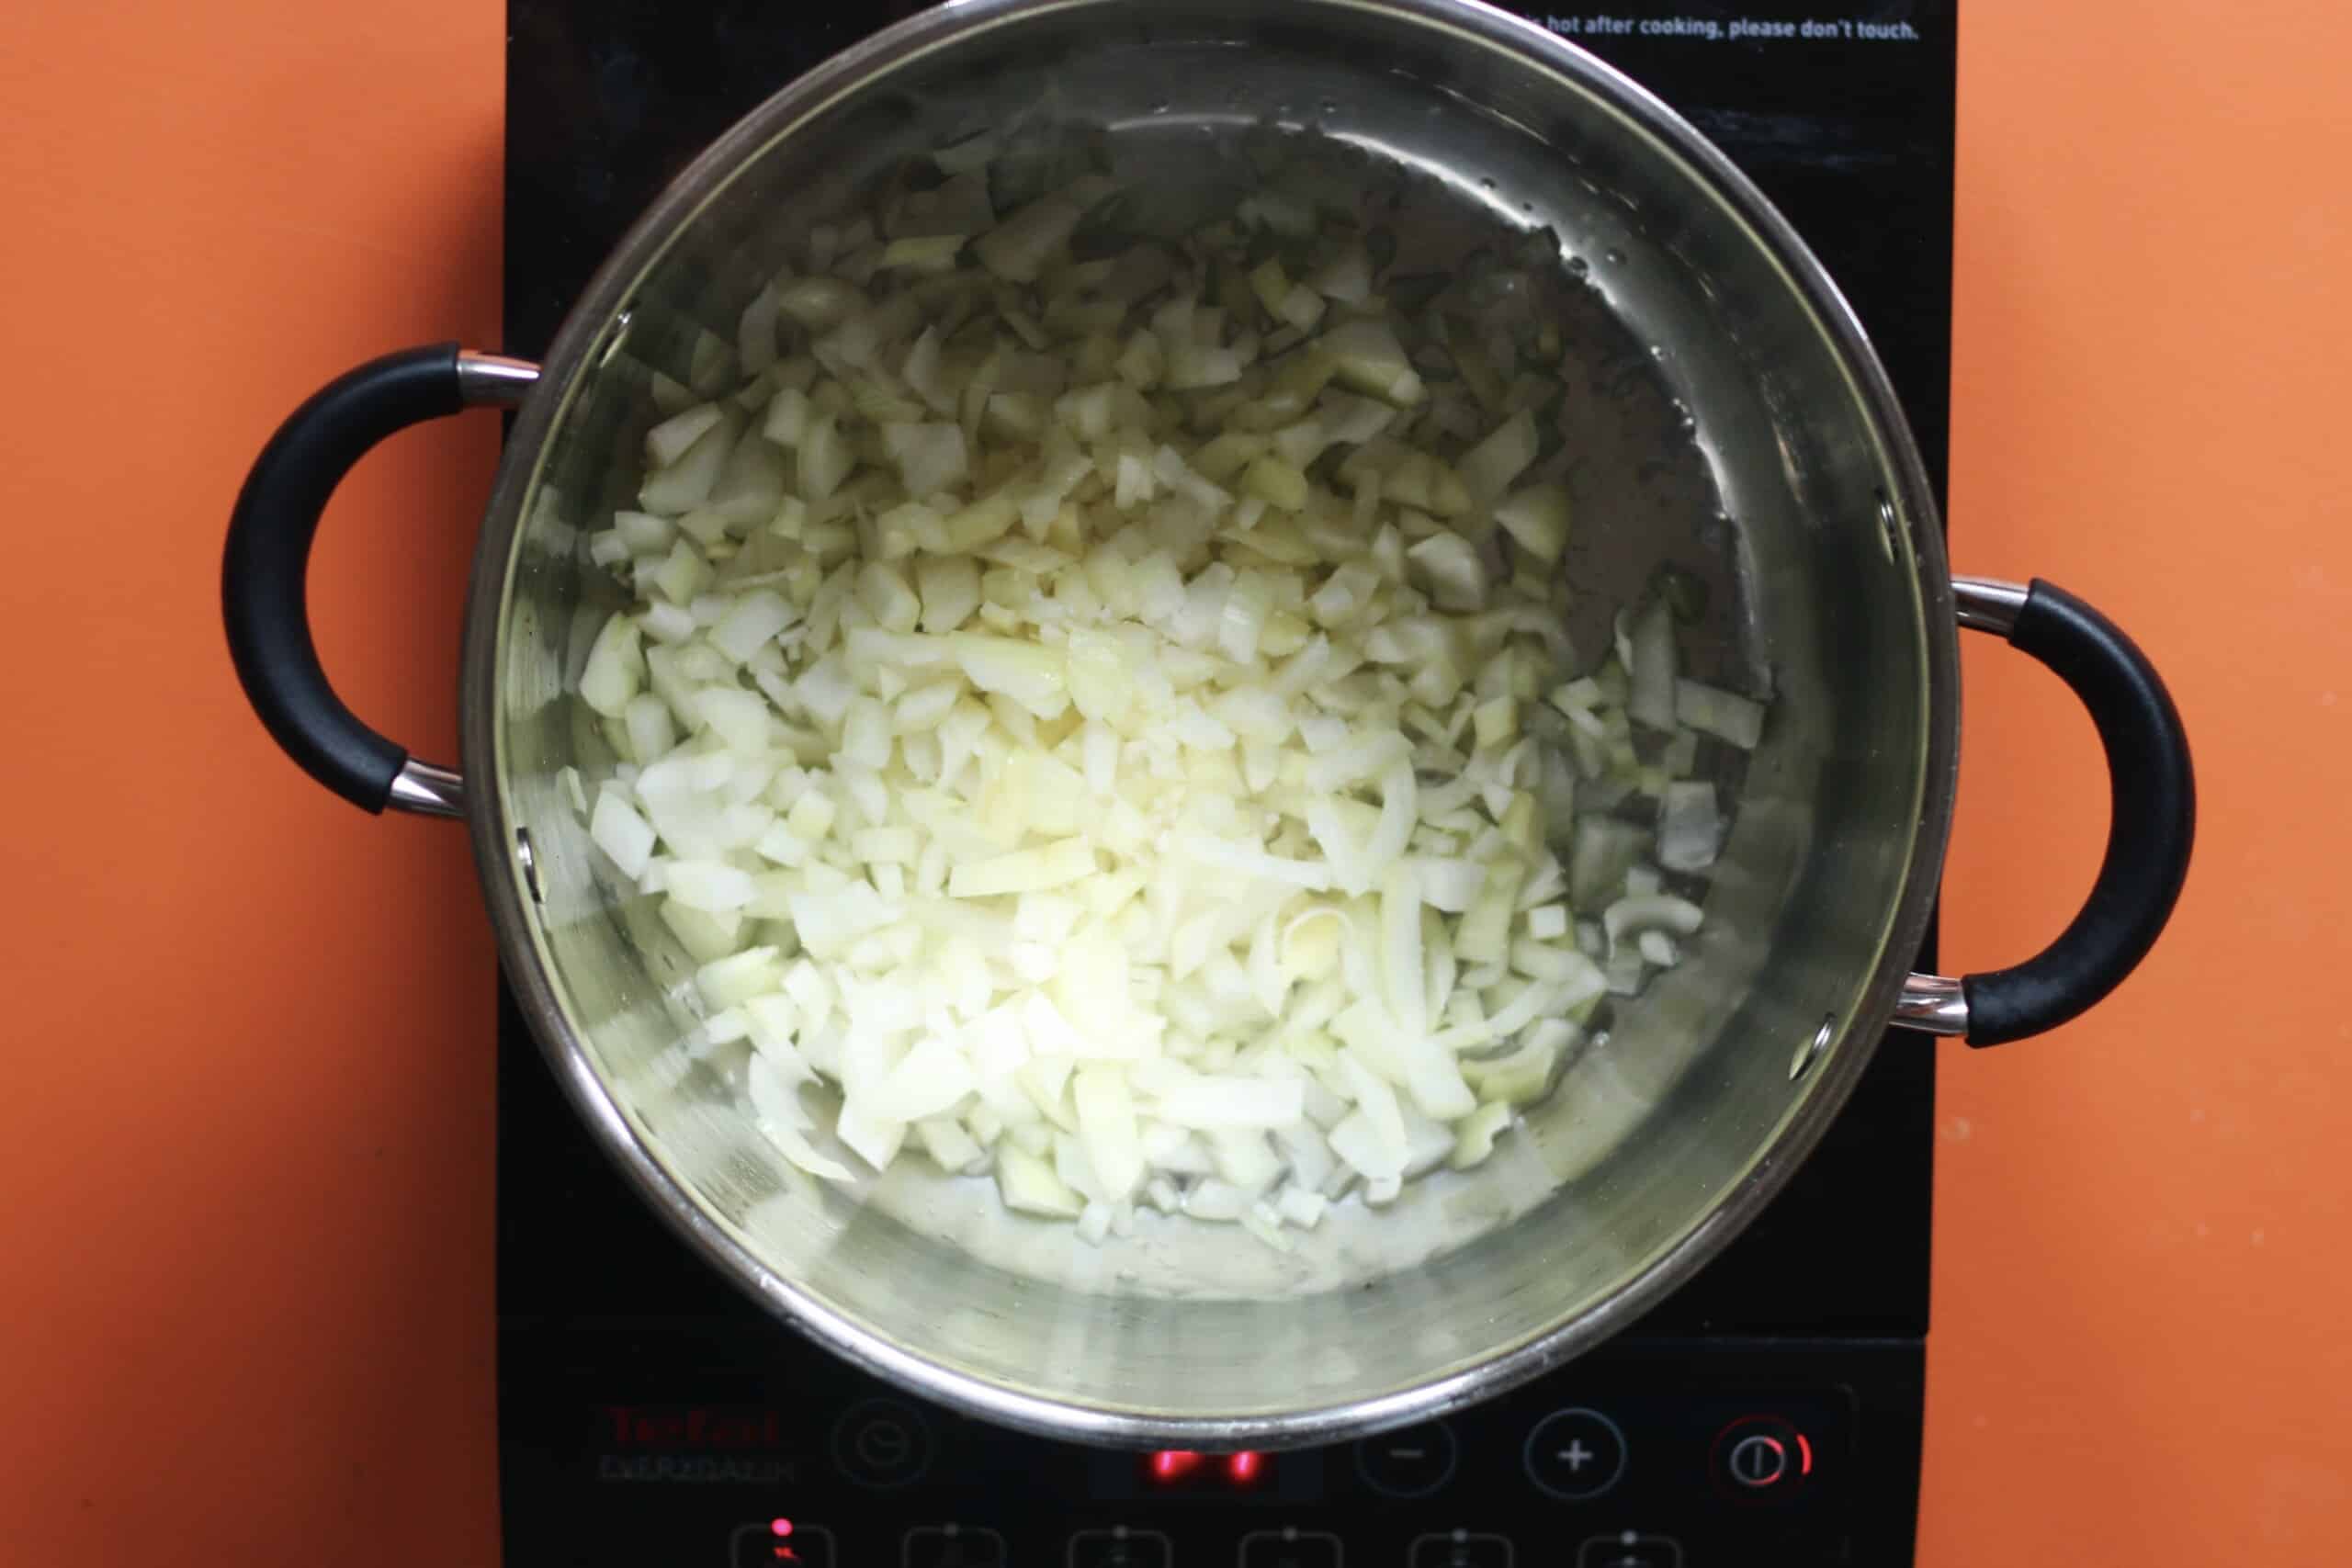 Diced onions frying in a saucepan with 2 handles on a stove on an orange background.